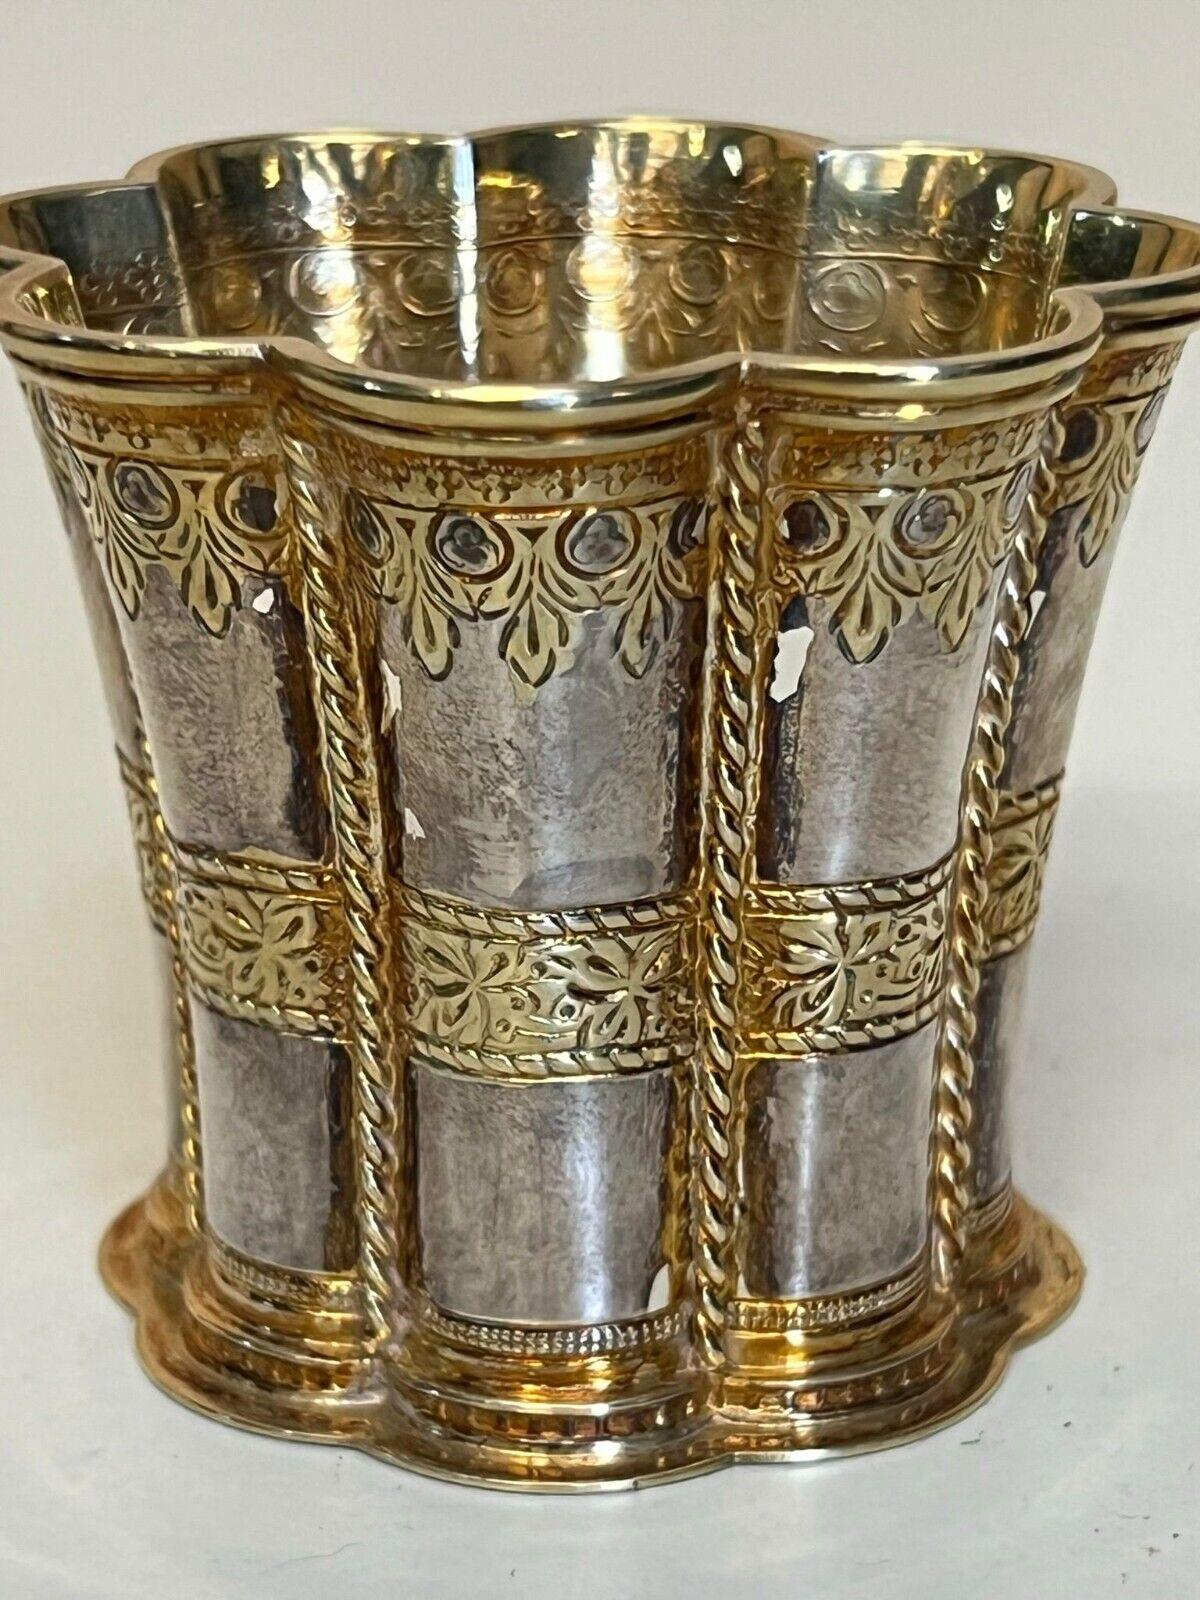 SOLID STERLING SiLVER 1967 DATED FULLY HALLMARKED QUEEN MARGRETHE CUP GOLD GILT For Sale 1